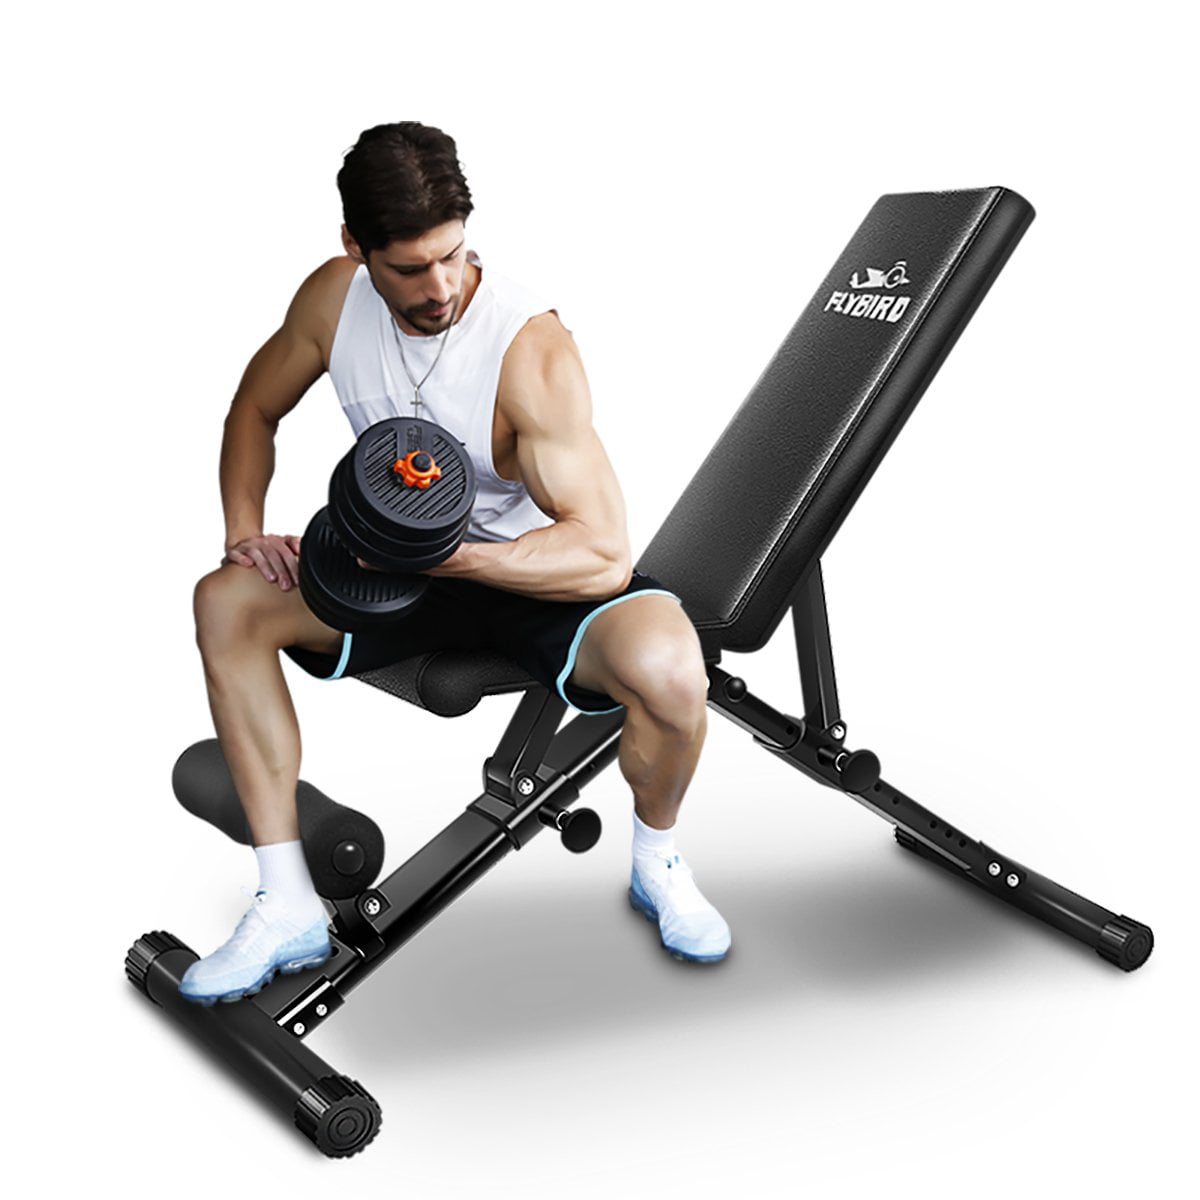 Folding Fly Bench Adjustable Weightlifting Gym Exercise Training Fitness Workout 